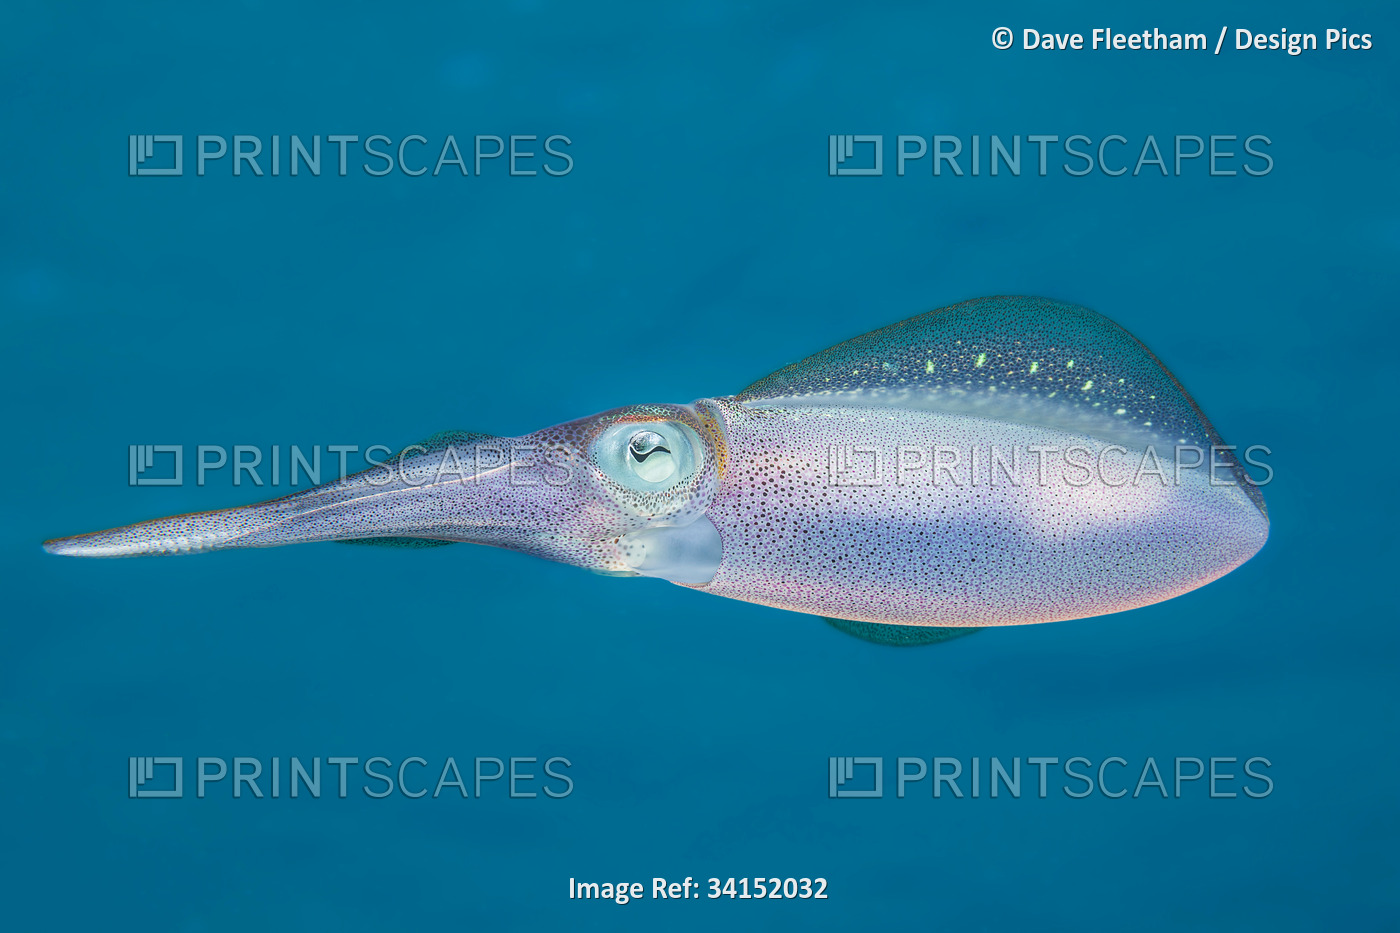 The Caribbean reef squid (Sepioteuthis sepioidea) is commonly observed in ...